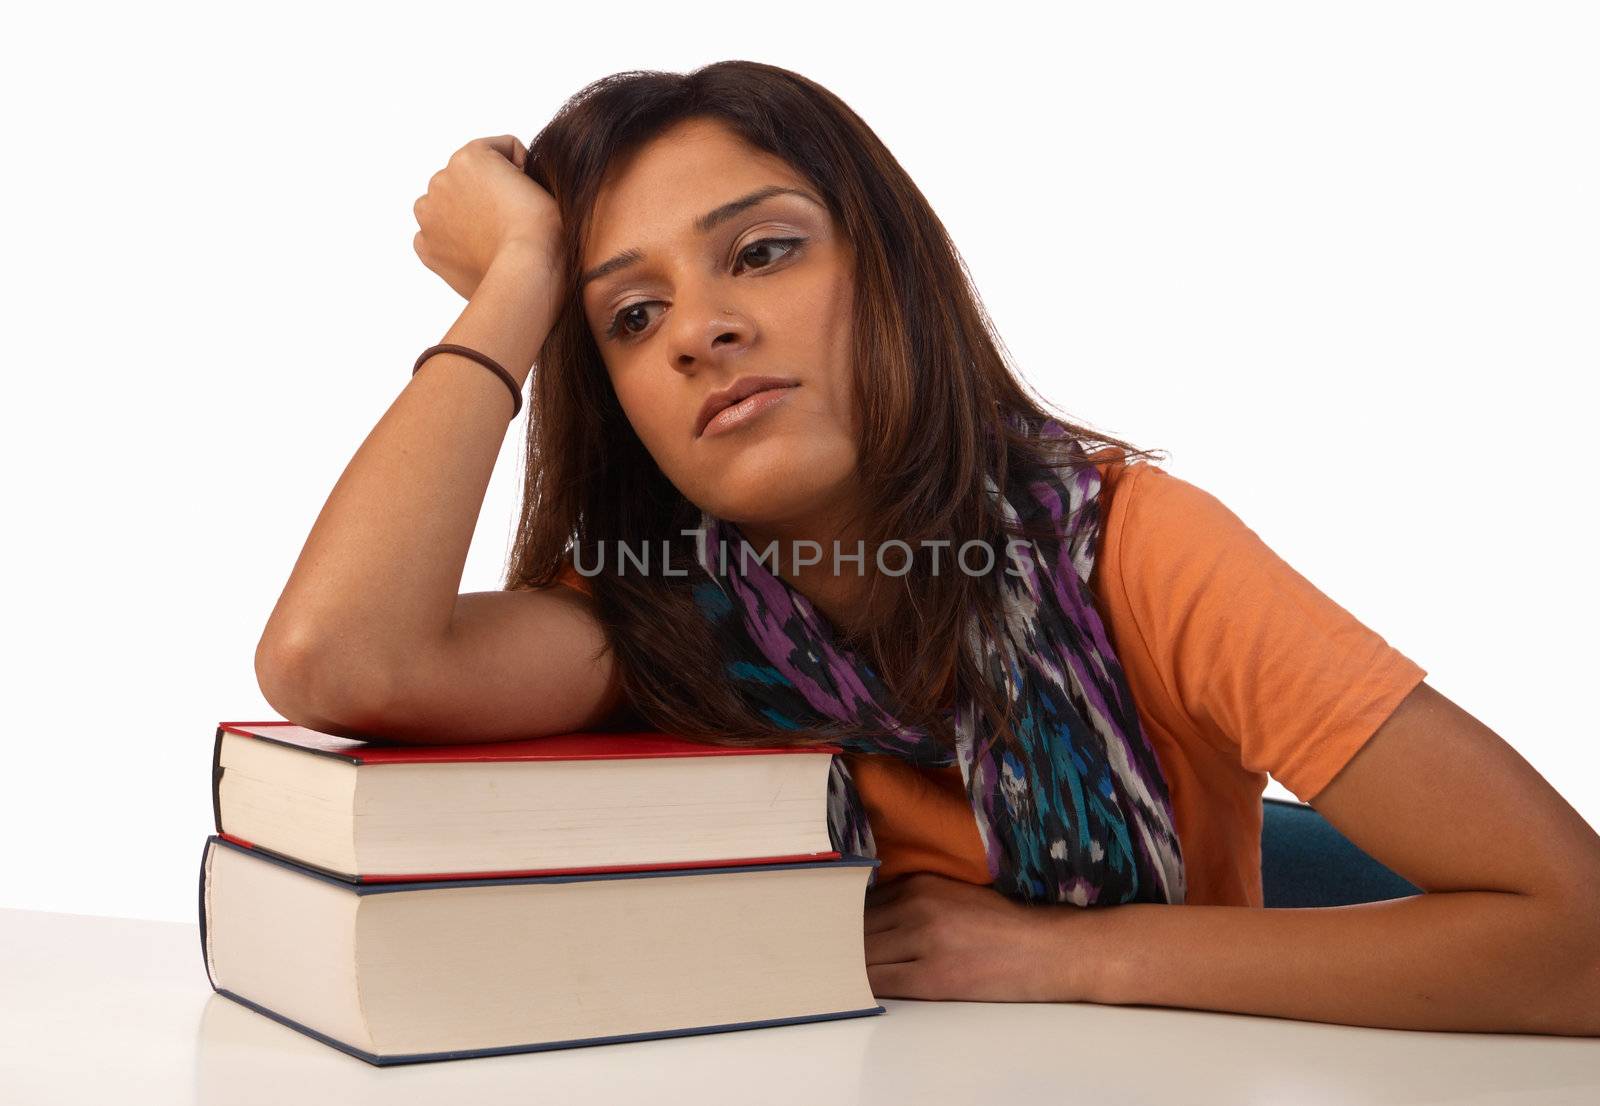 Middle eastern student in an uninterested attitude towards her books